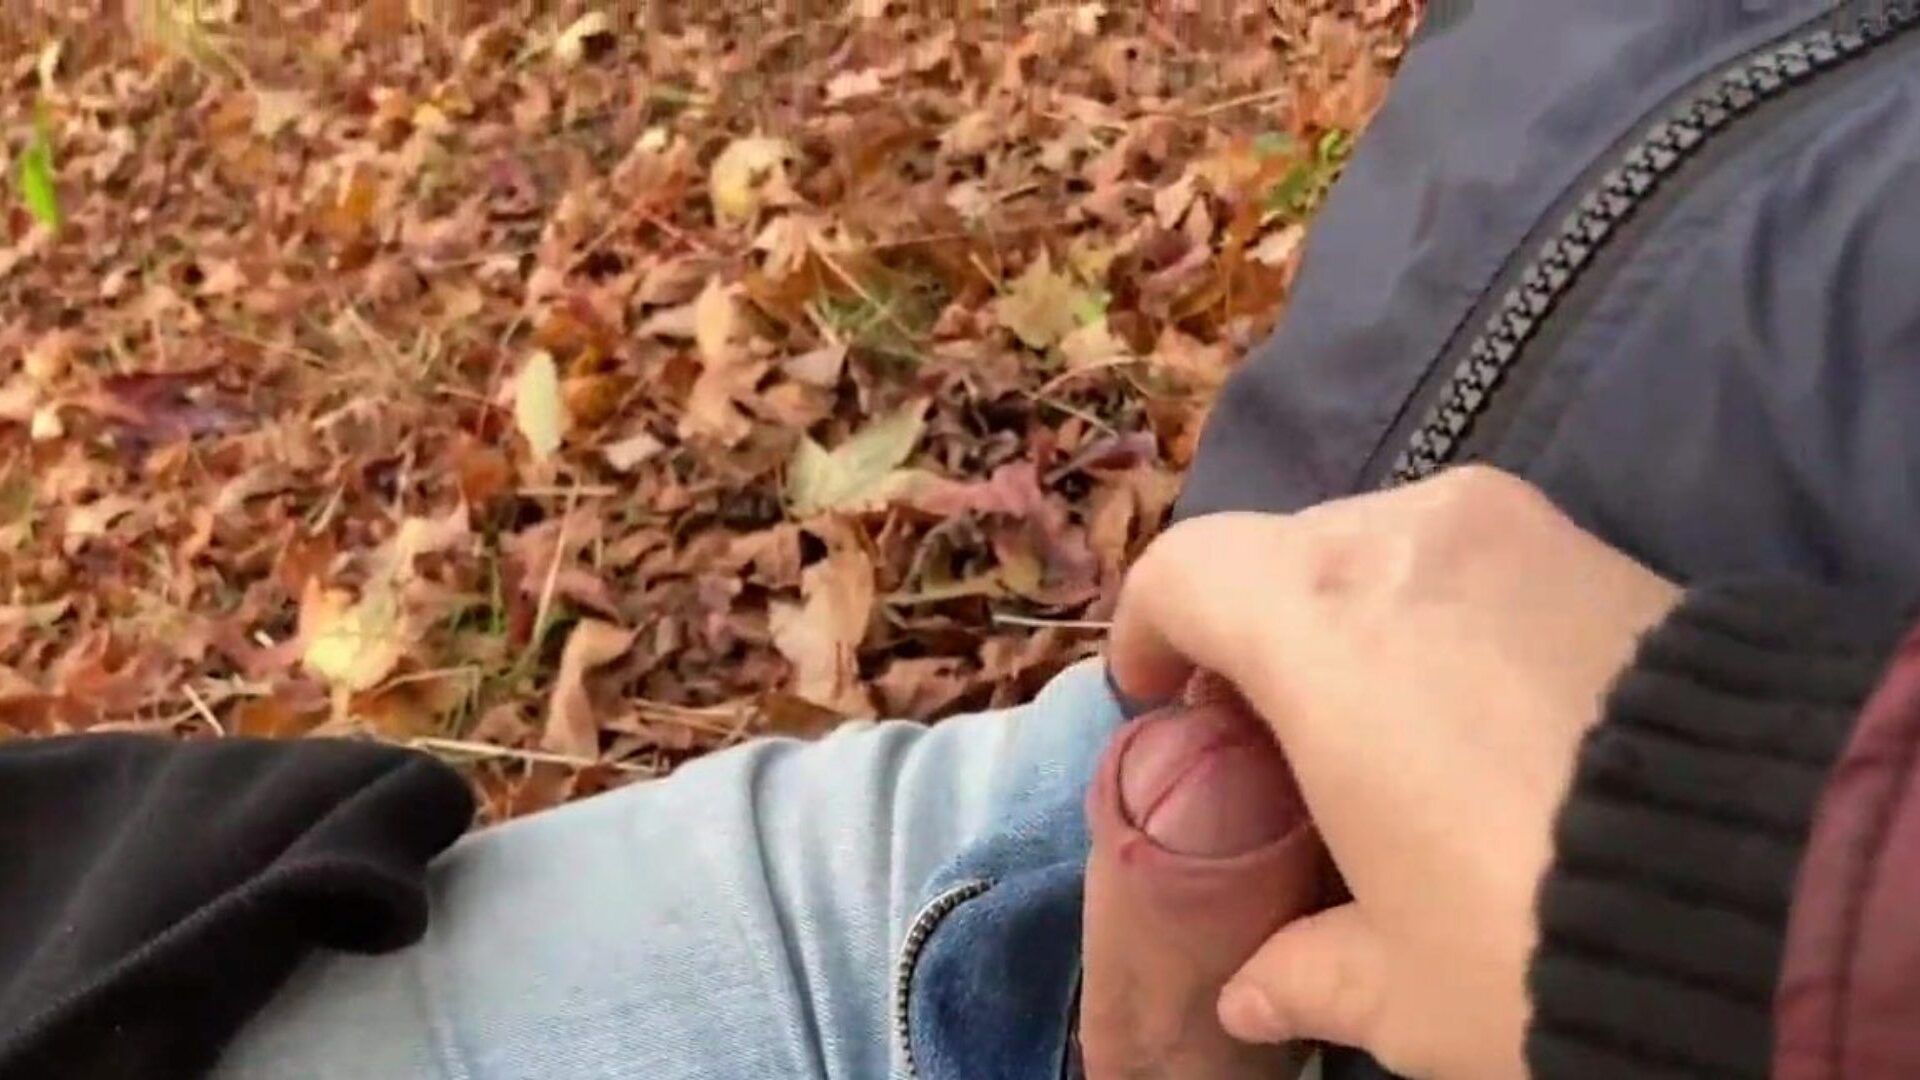 Quick, nervous nail out in nature while stashing from vans